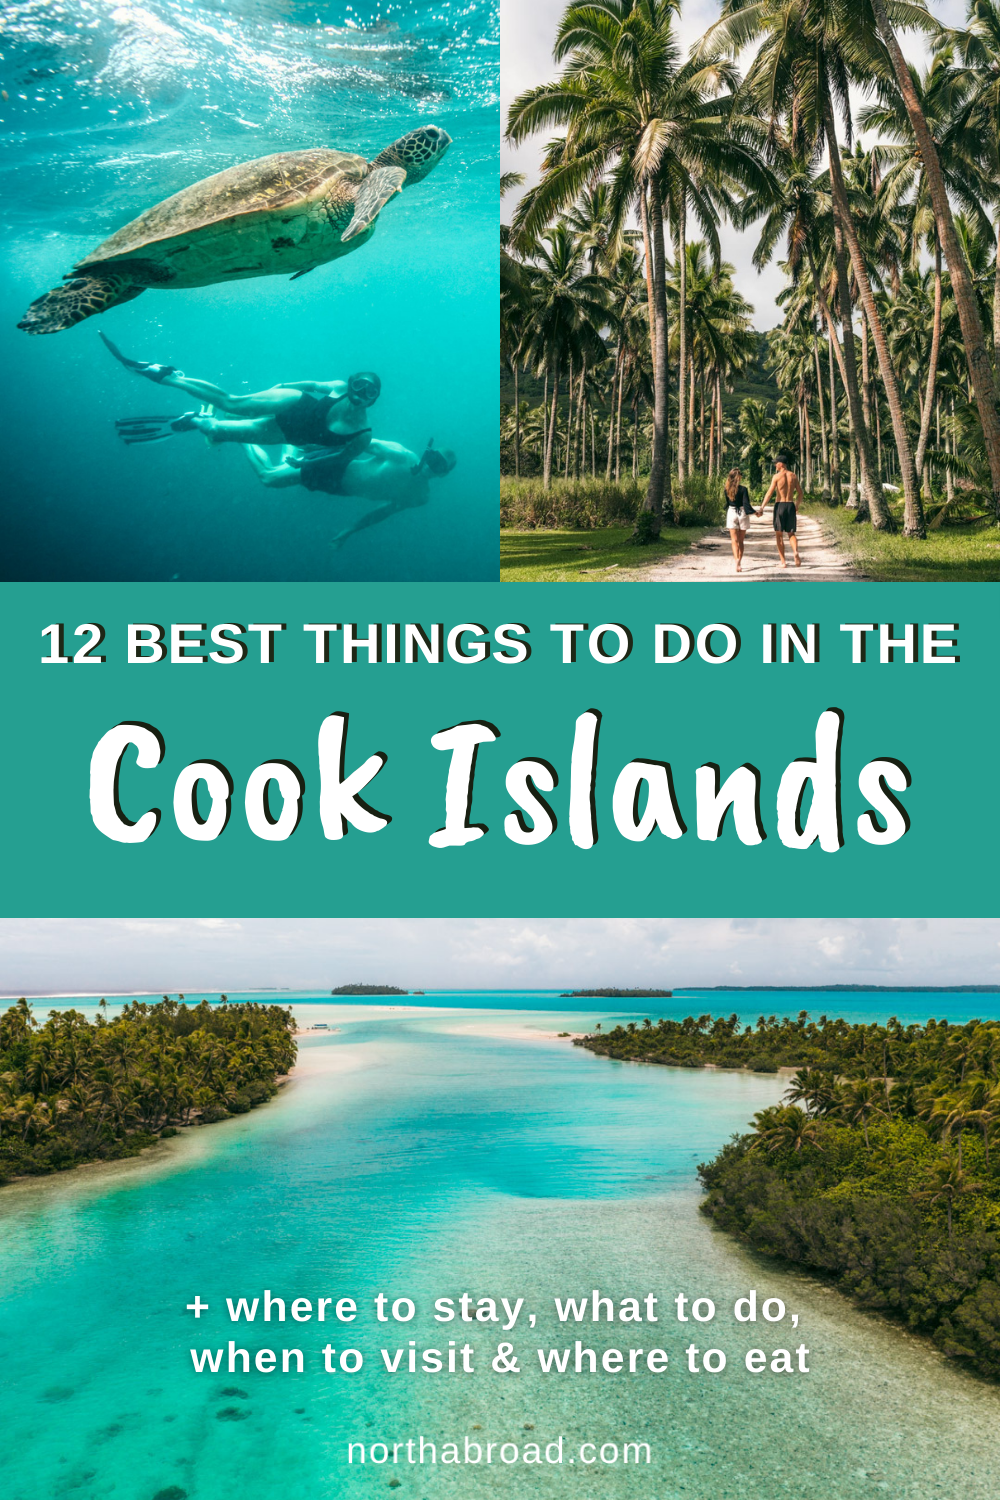 Everything you need to know about visiting Rarotonga in the Cook Islands including the best things to do, best places to eat, where to stay and much more.